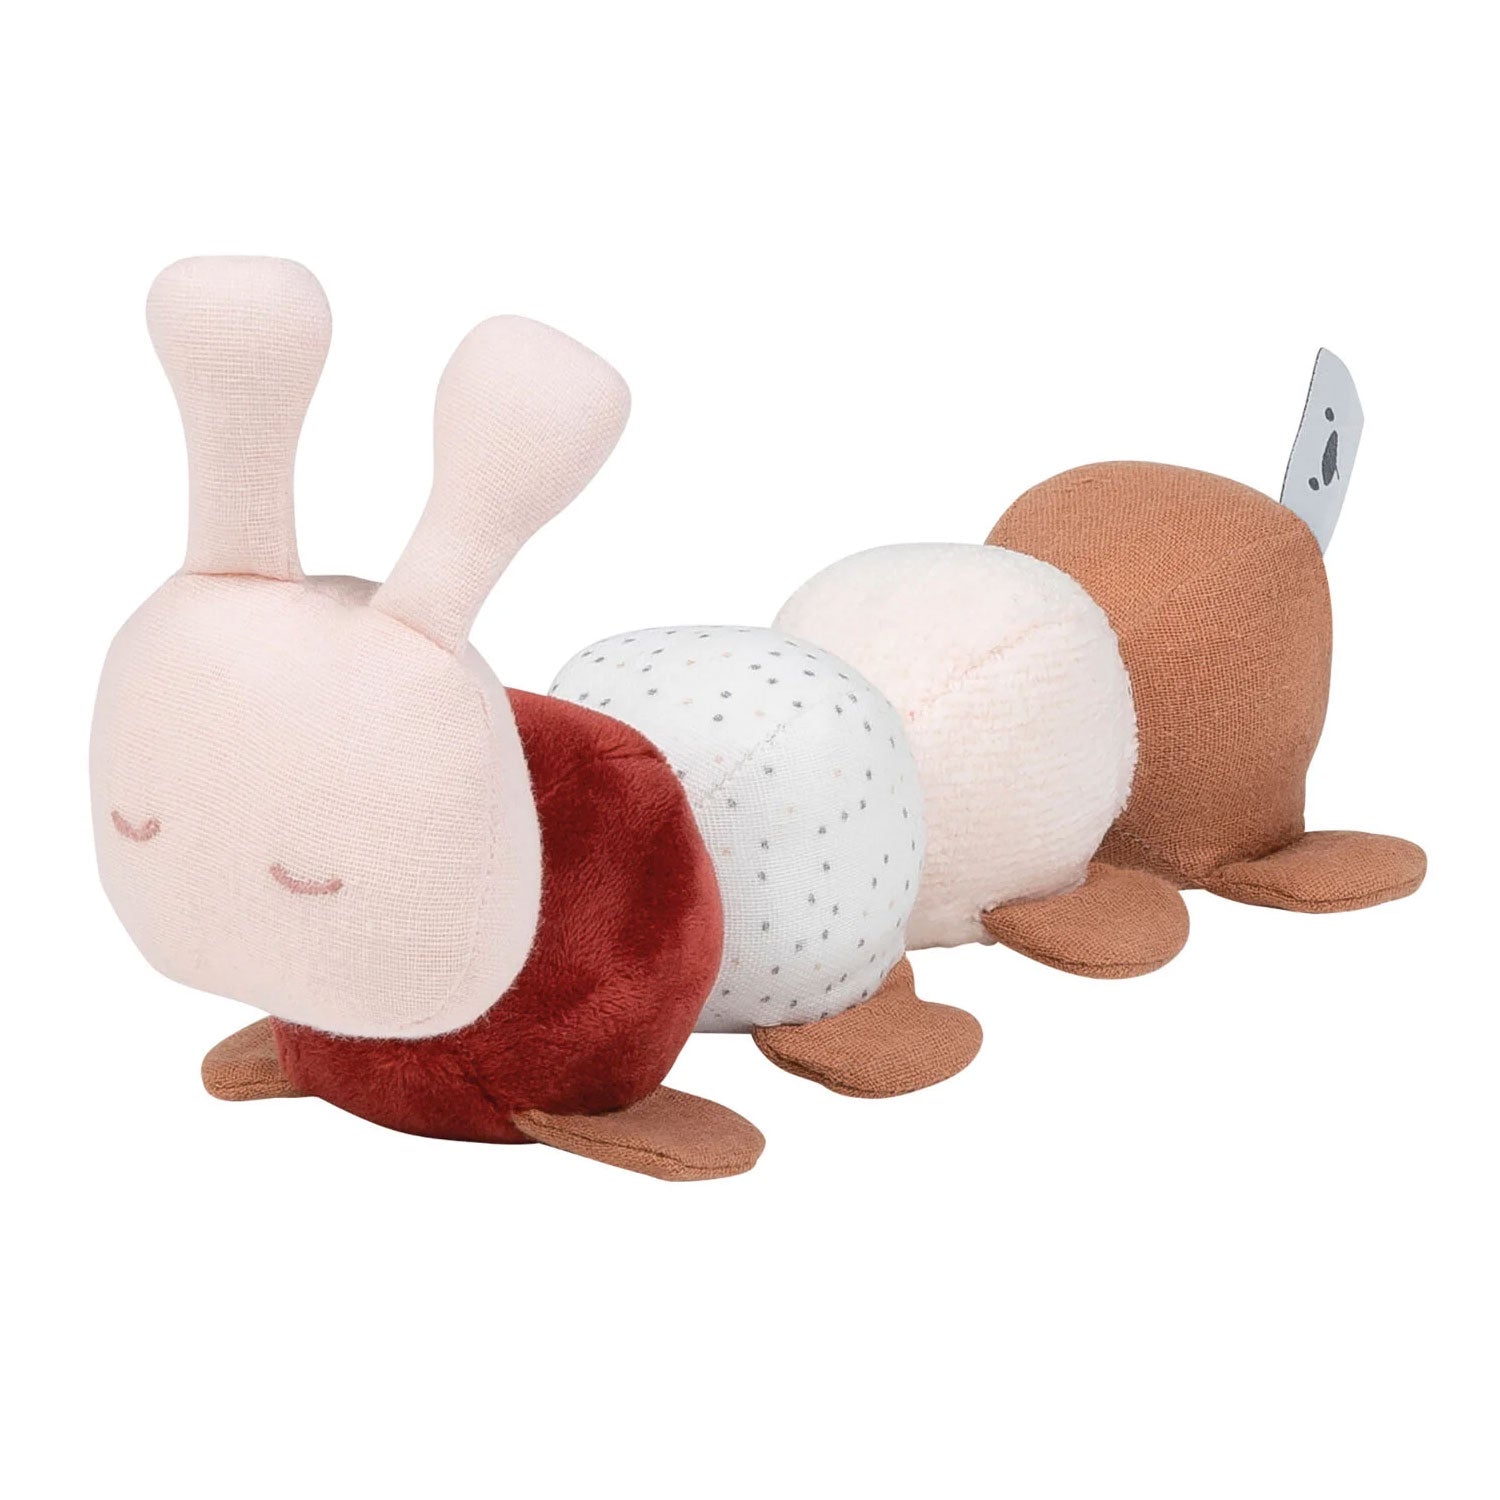 A beautifully soft and cute cuddly caterpillar toy from Nattou. The caterpillar comes with four activities designed to stimulate the senses of your new little one. Rattling, squeaking, paper crunching and various materials made this a cuddly toy with a difference!